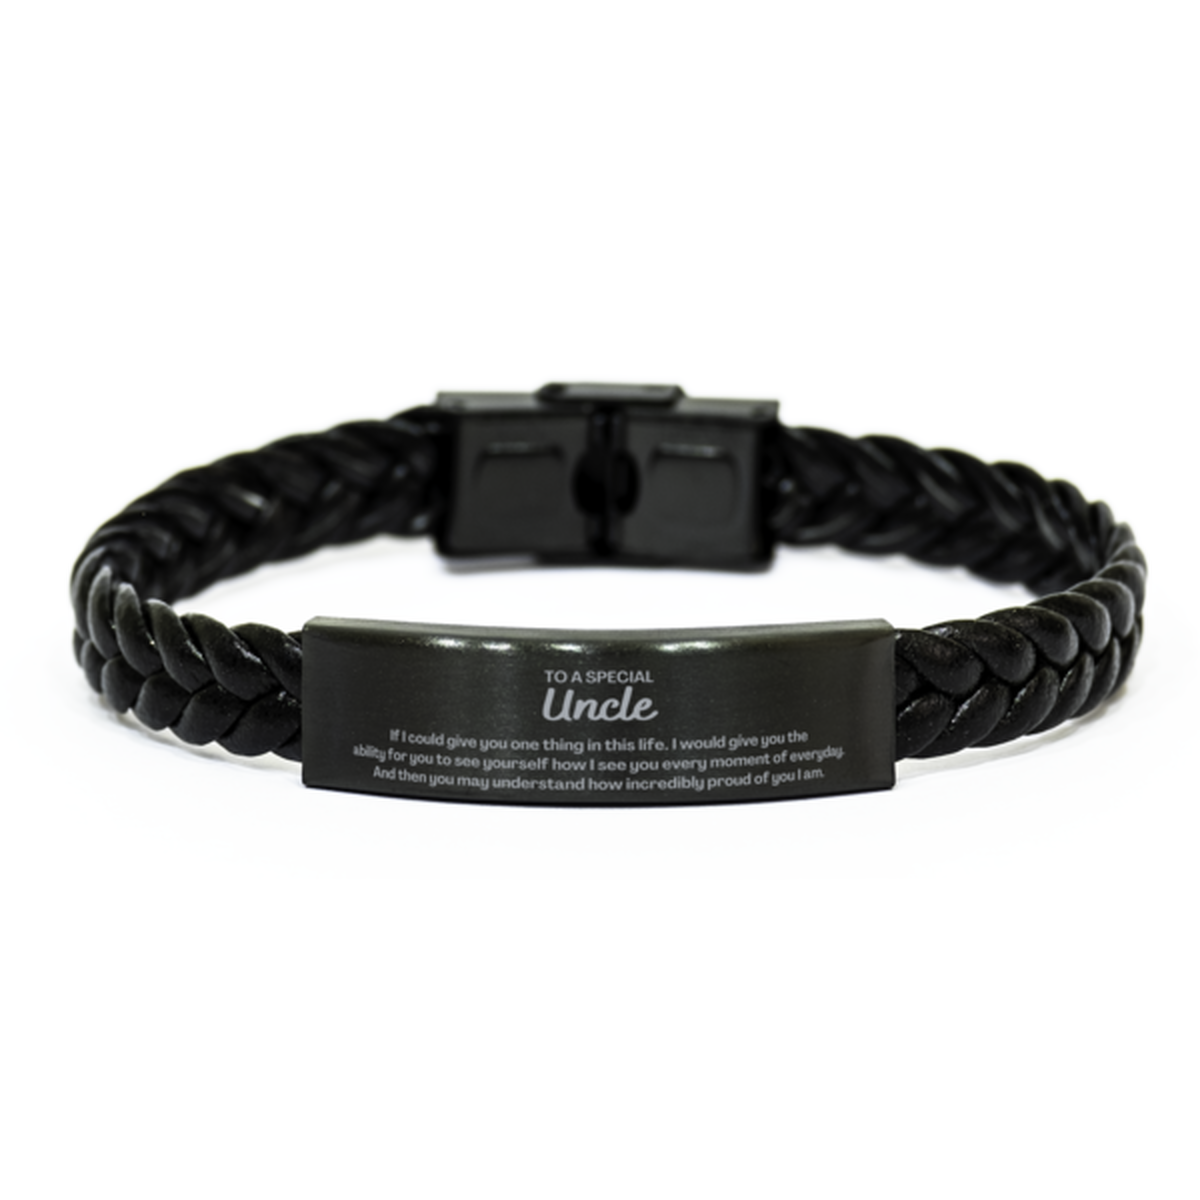 To My Uncle Braided Leather Bracelet, Gifts For Uncle Engraved, Inspirational Gifts for Christmas Birthday, Epic Gifts for Uncle To A Special Uncle how incredibly proud of you I am